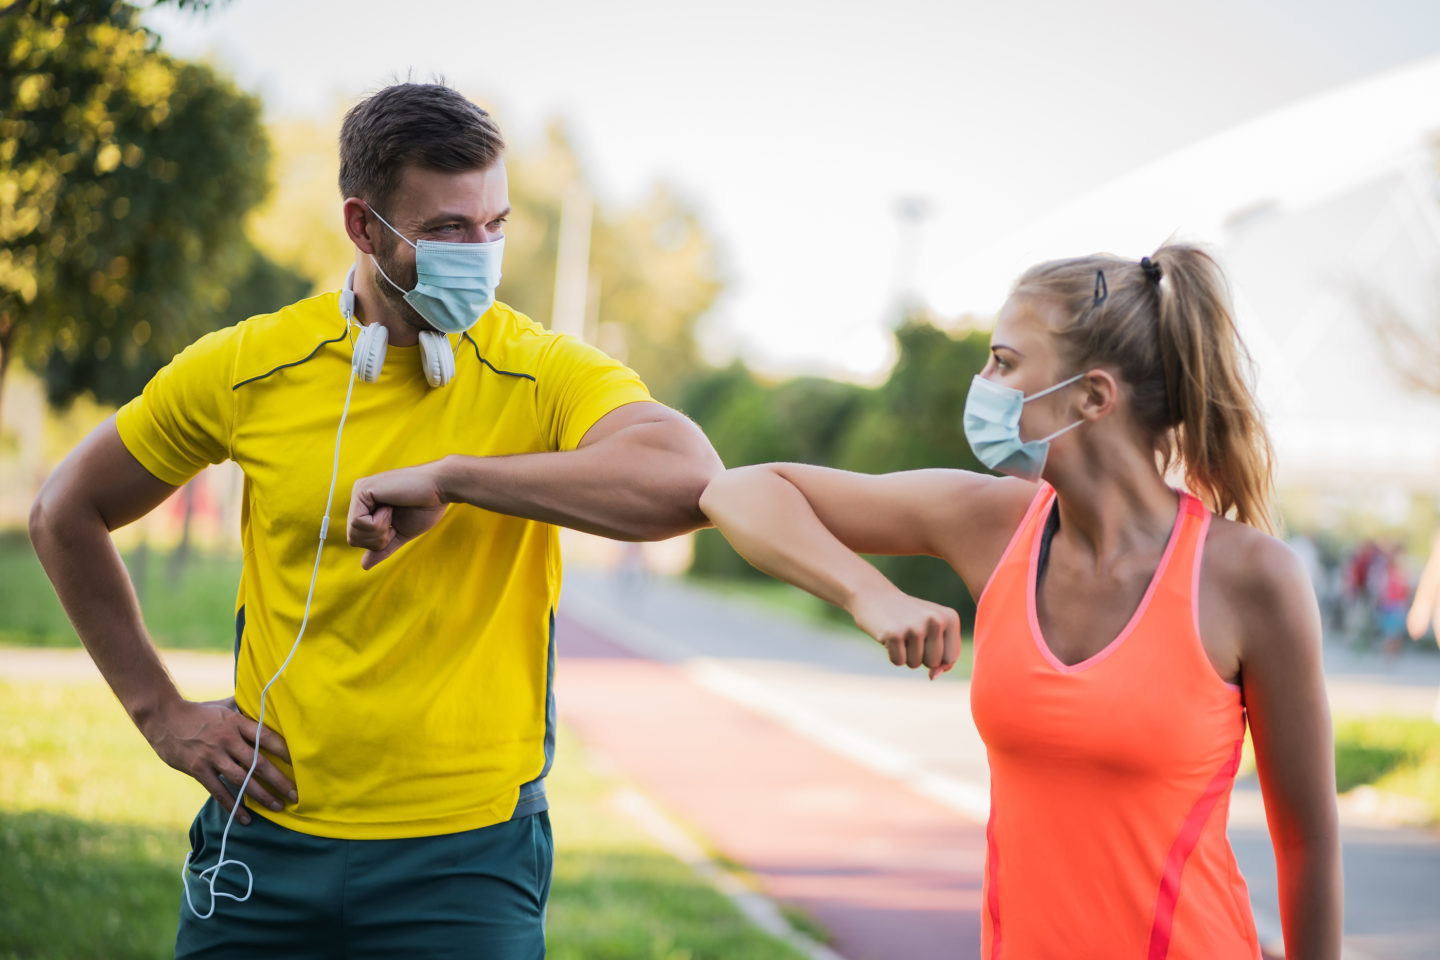 Young couple is getting ready for outdoor workout with protective masks. Covid-19 responsible behavior.